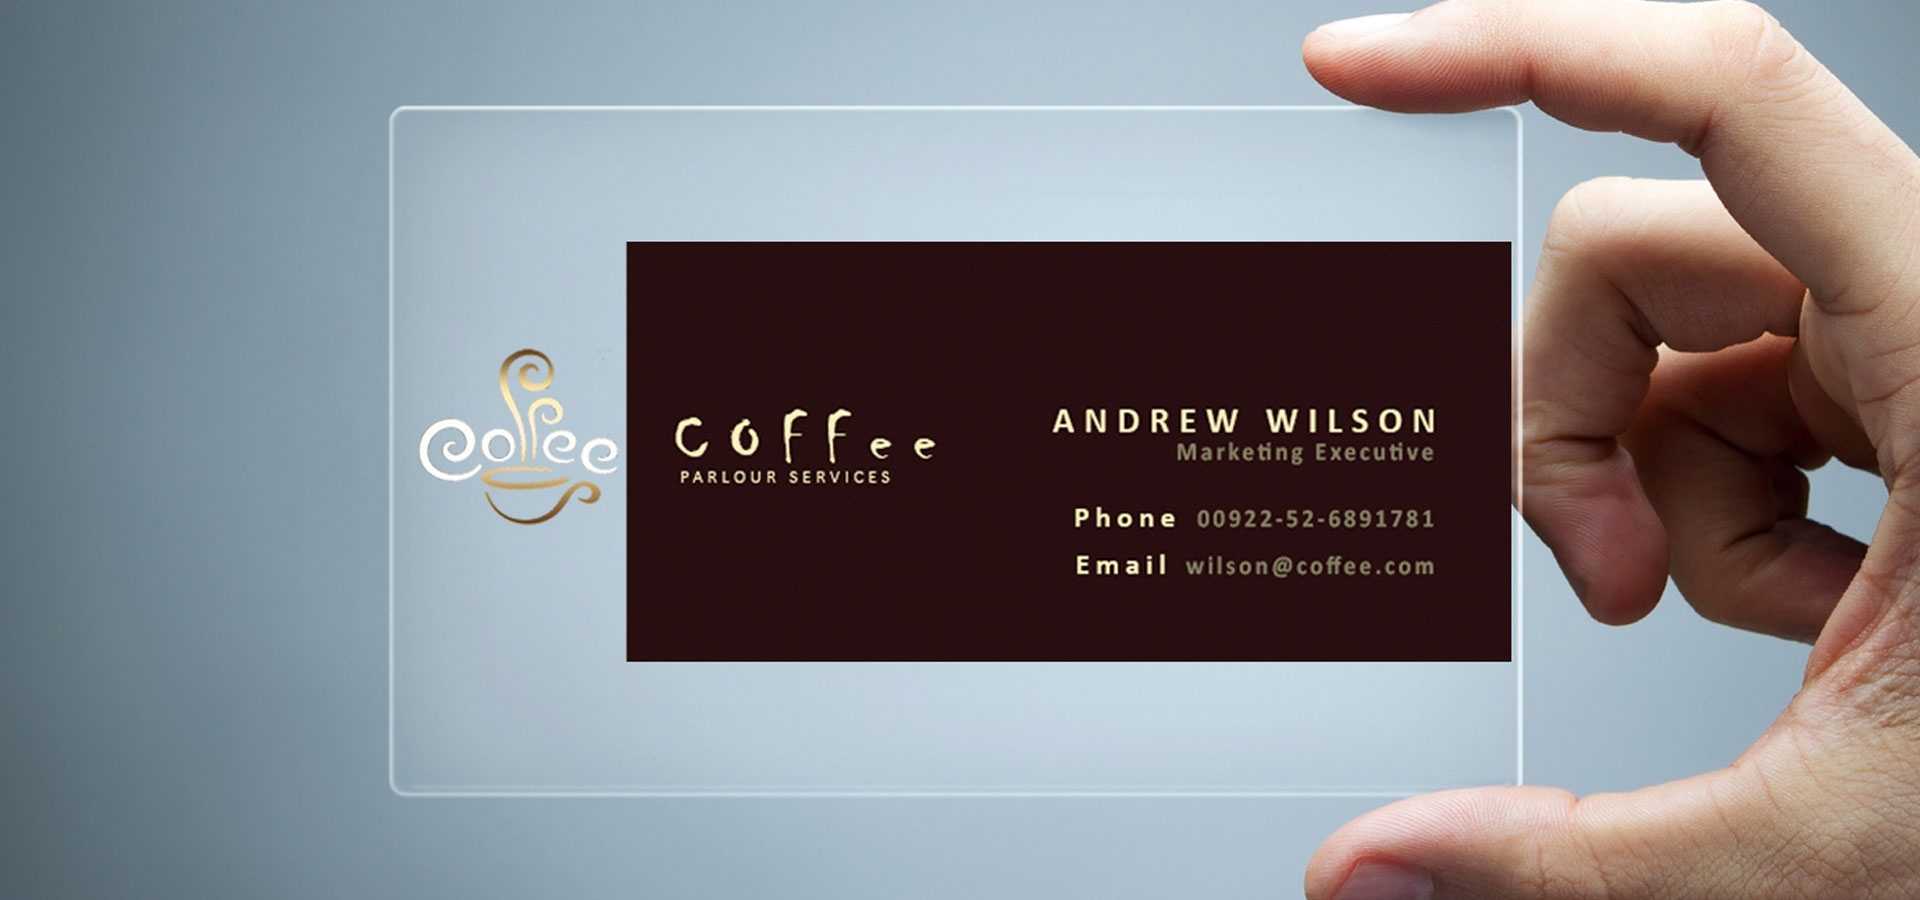 26+ Transparent Business Card Templates - Illustrator, Ms Throughout Microsoft Office Business Card Template